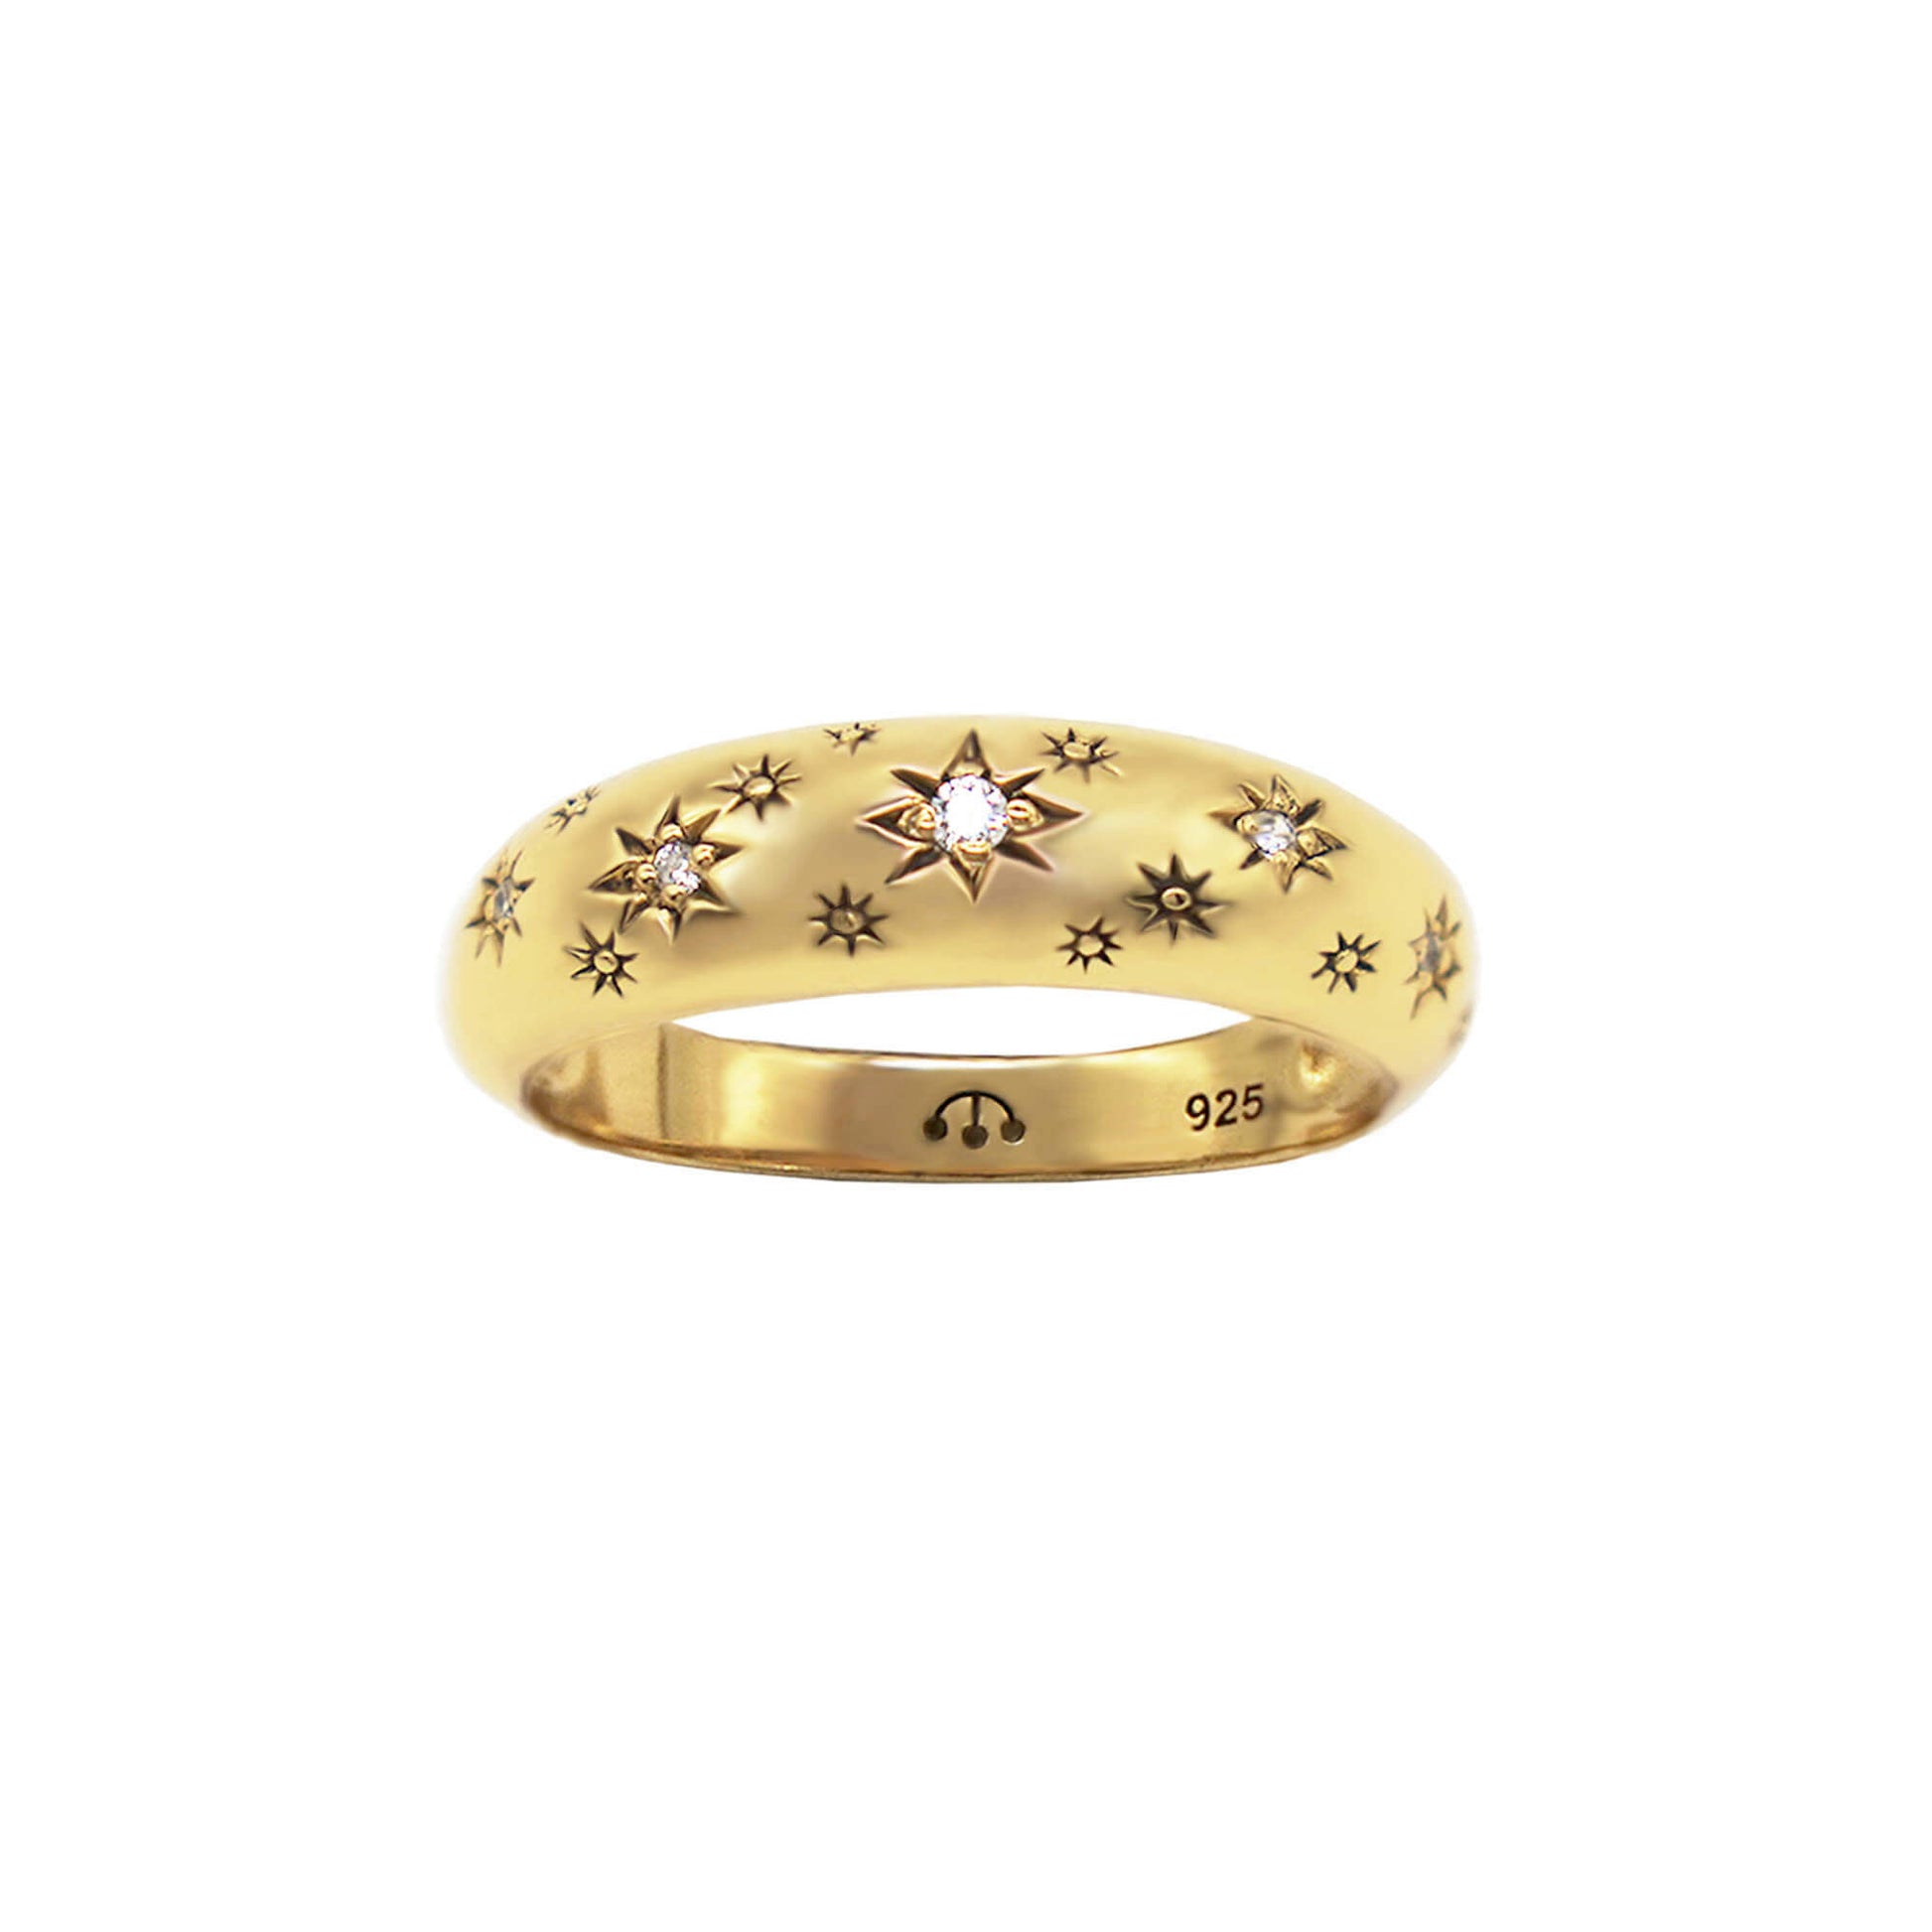 Gold domed band ring with clear cubic zirconia stones set in starburst setting. Pawnshop three ball logo on inner band and 925 to make silver.